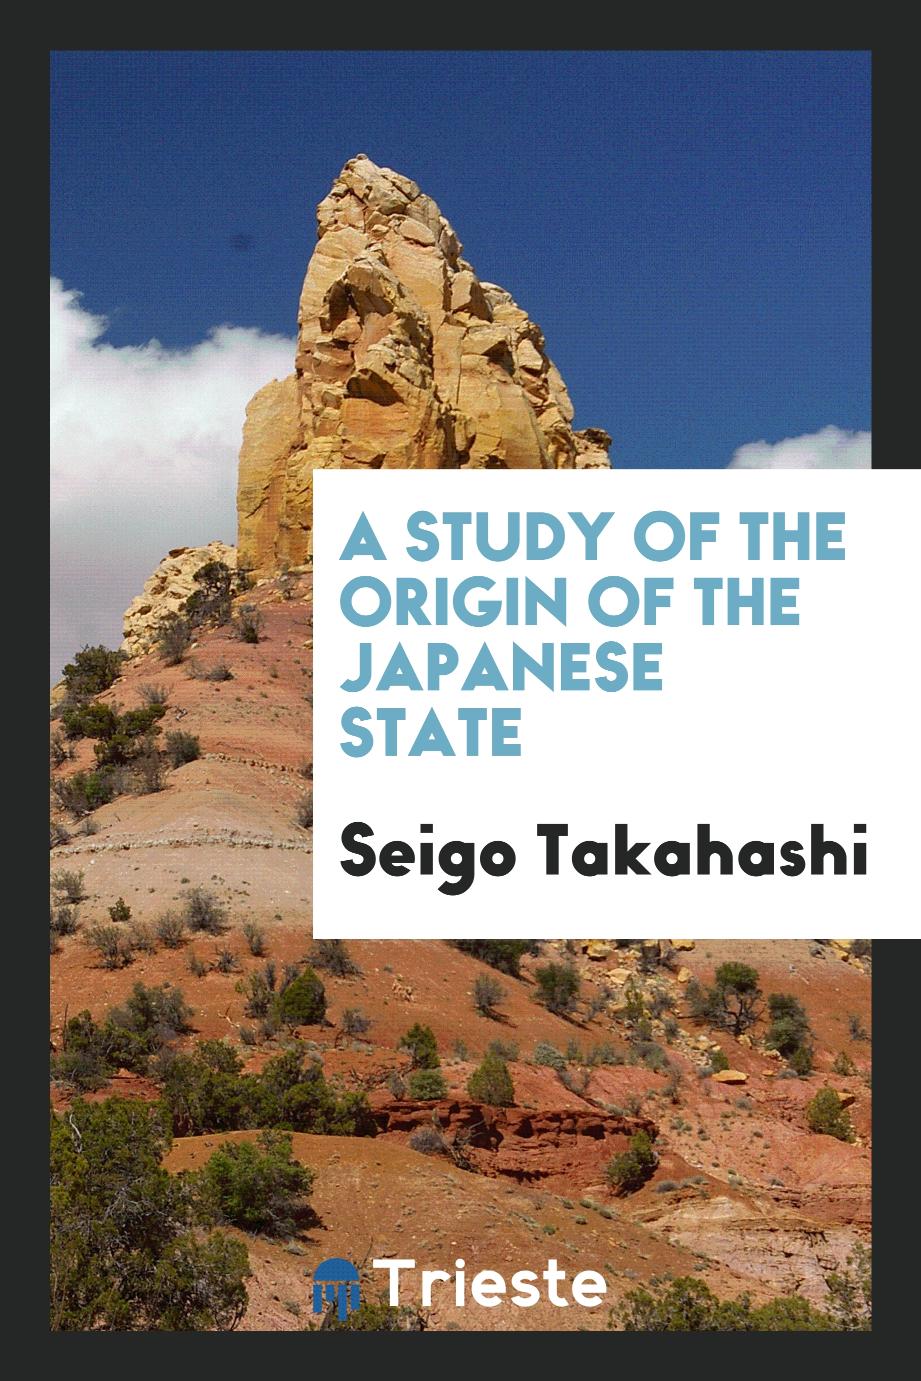 A Study of the Origin of the Japanese State